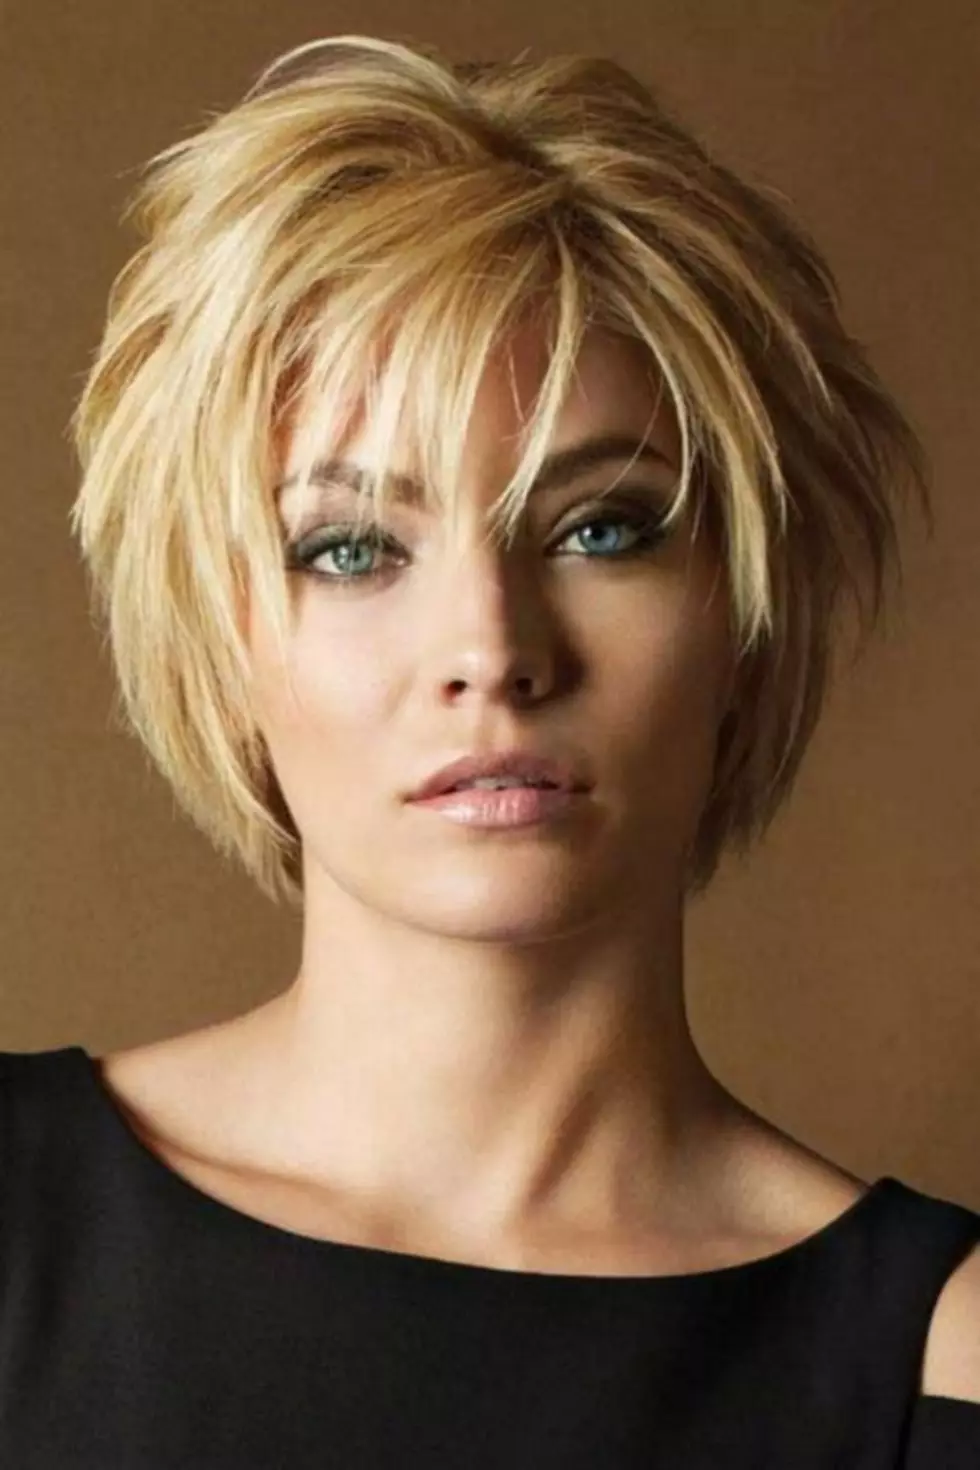 Haircuts who are young, for women after 40 years old (70 photos): rejuvenating hairstyles for women with medium and short hair length. How to remove the extra years to women with a round face and face of another form? 5938_35